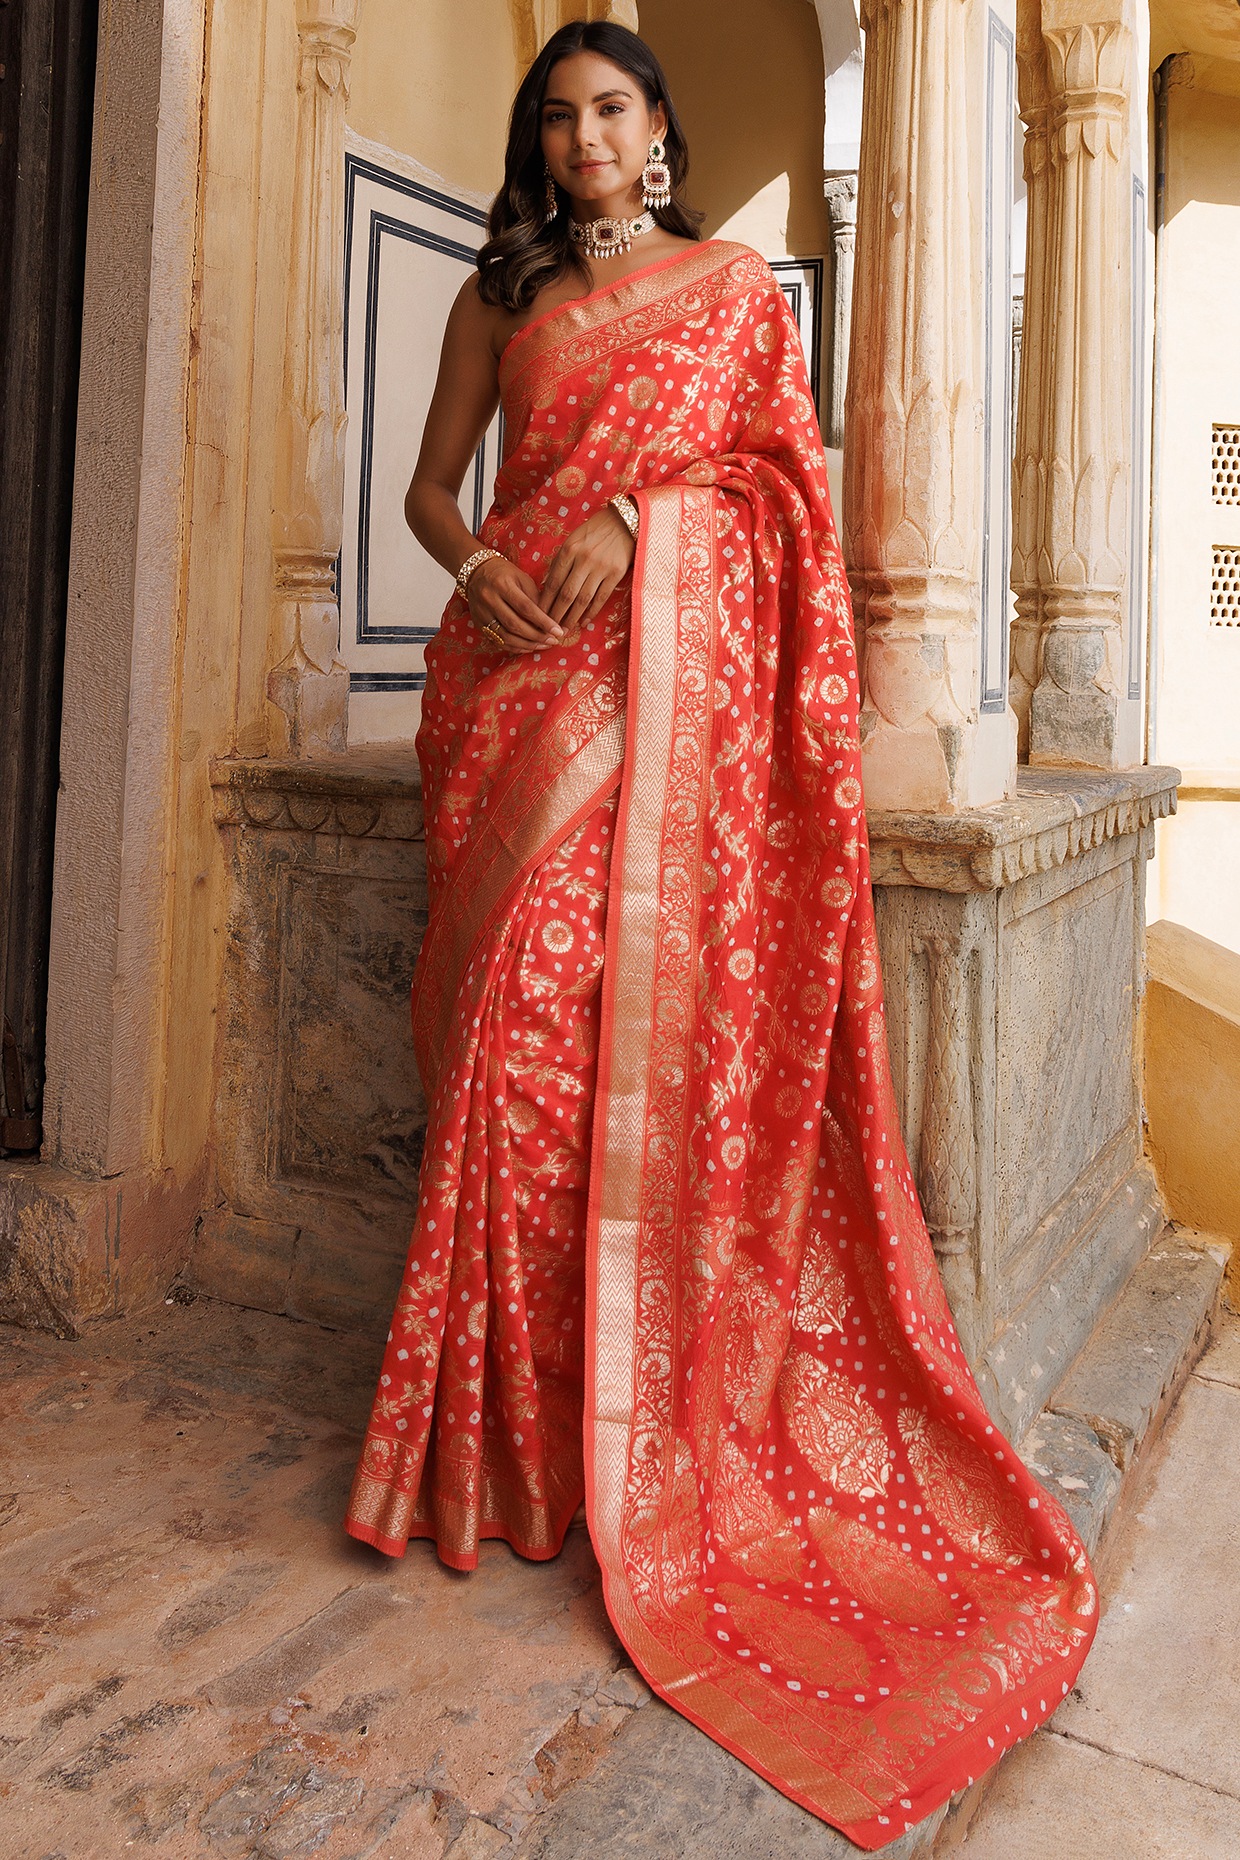 Pure Khaddi Georgette Banarasi Saree in Coral Peach with Muted Gold Zari  with Digital Floral Prints | Handwoven Sarees | SILK MARK CERTIFIED – Kaash